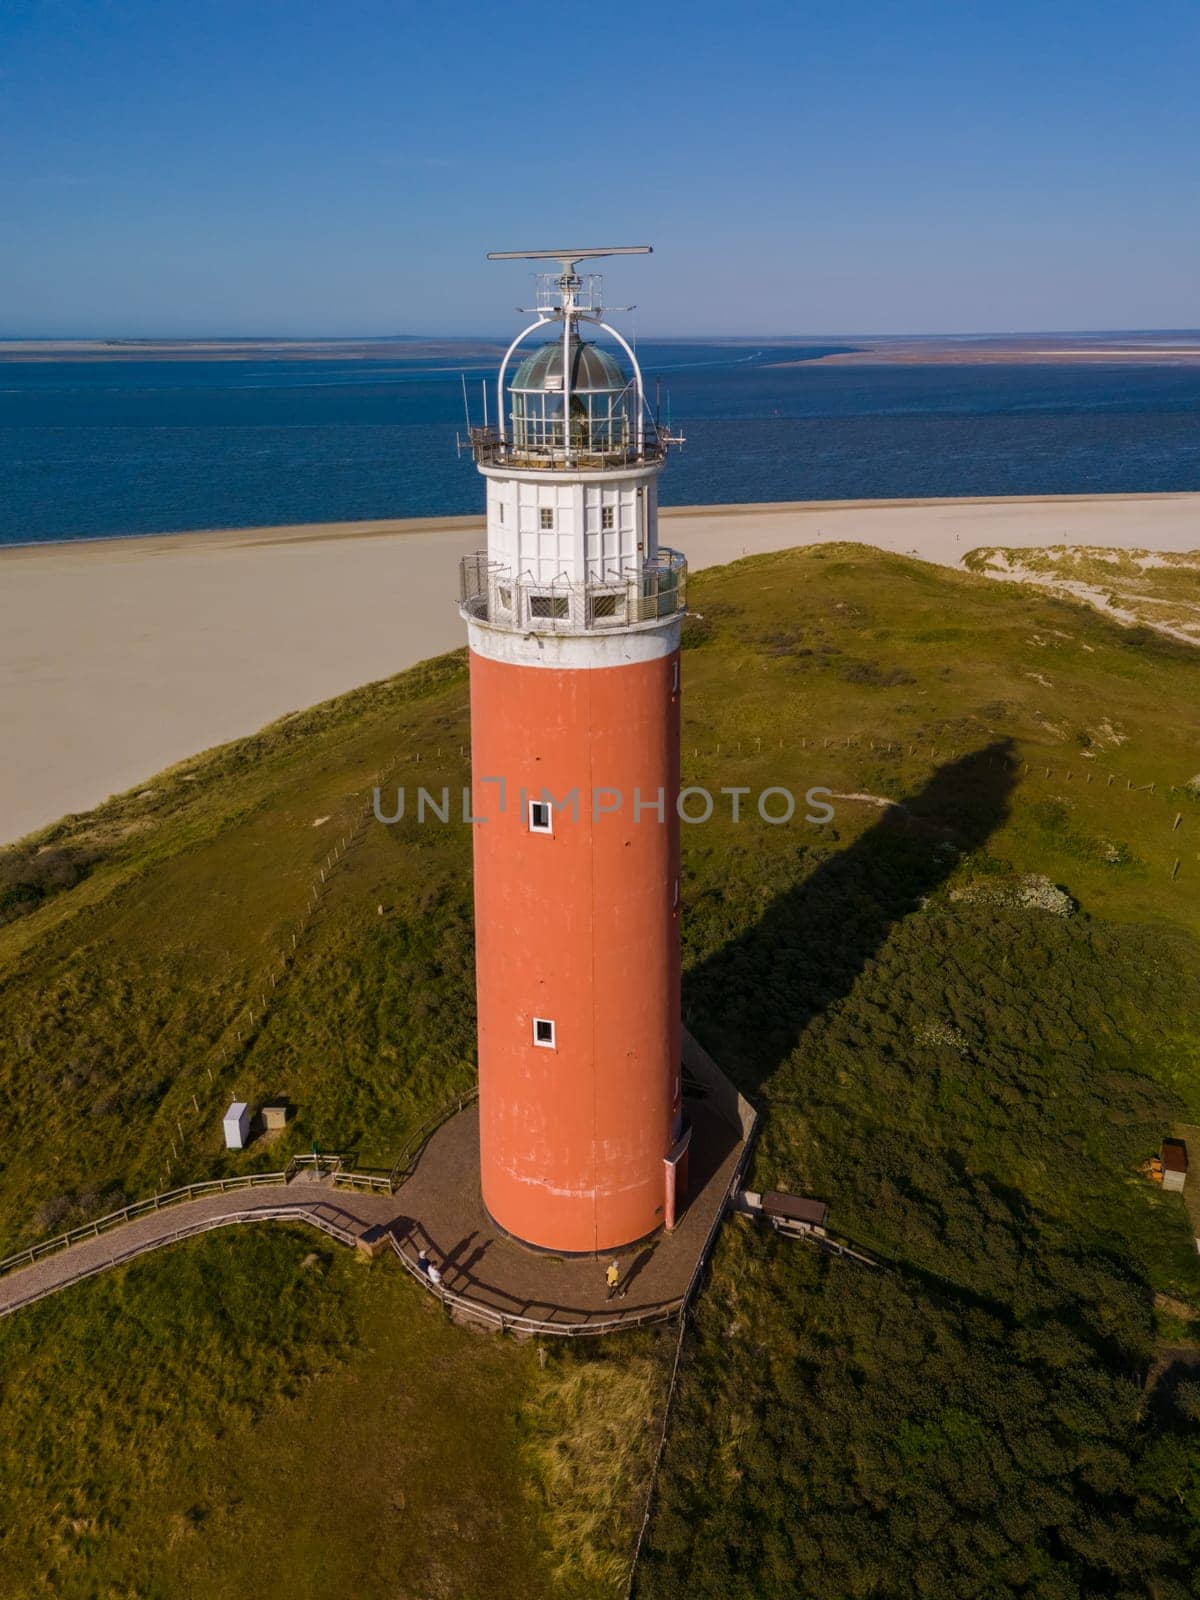 An aerial perspective capturing a lone lighthouse standing tall on the sandy shore of Texel, Netherlands, guiding ships safely through the night.